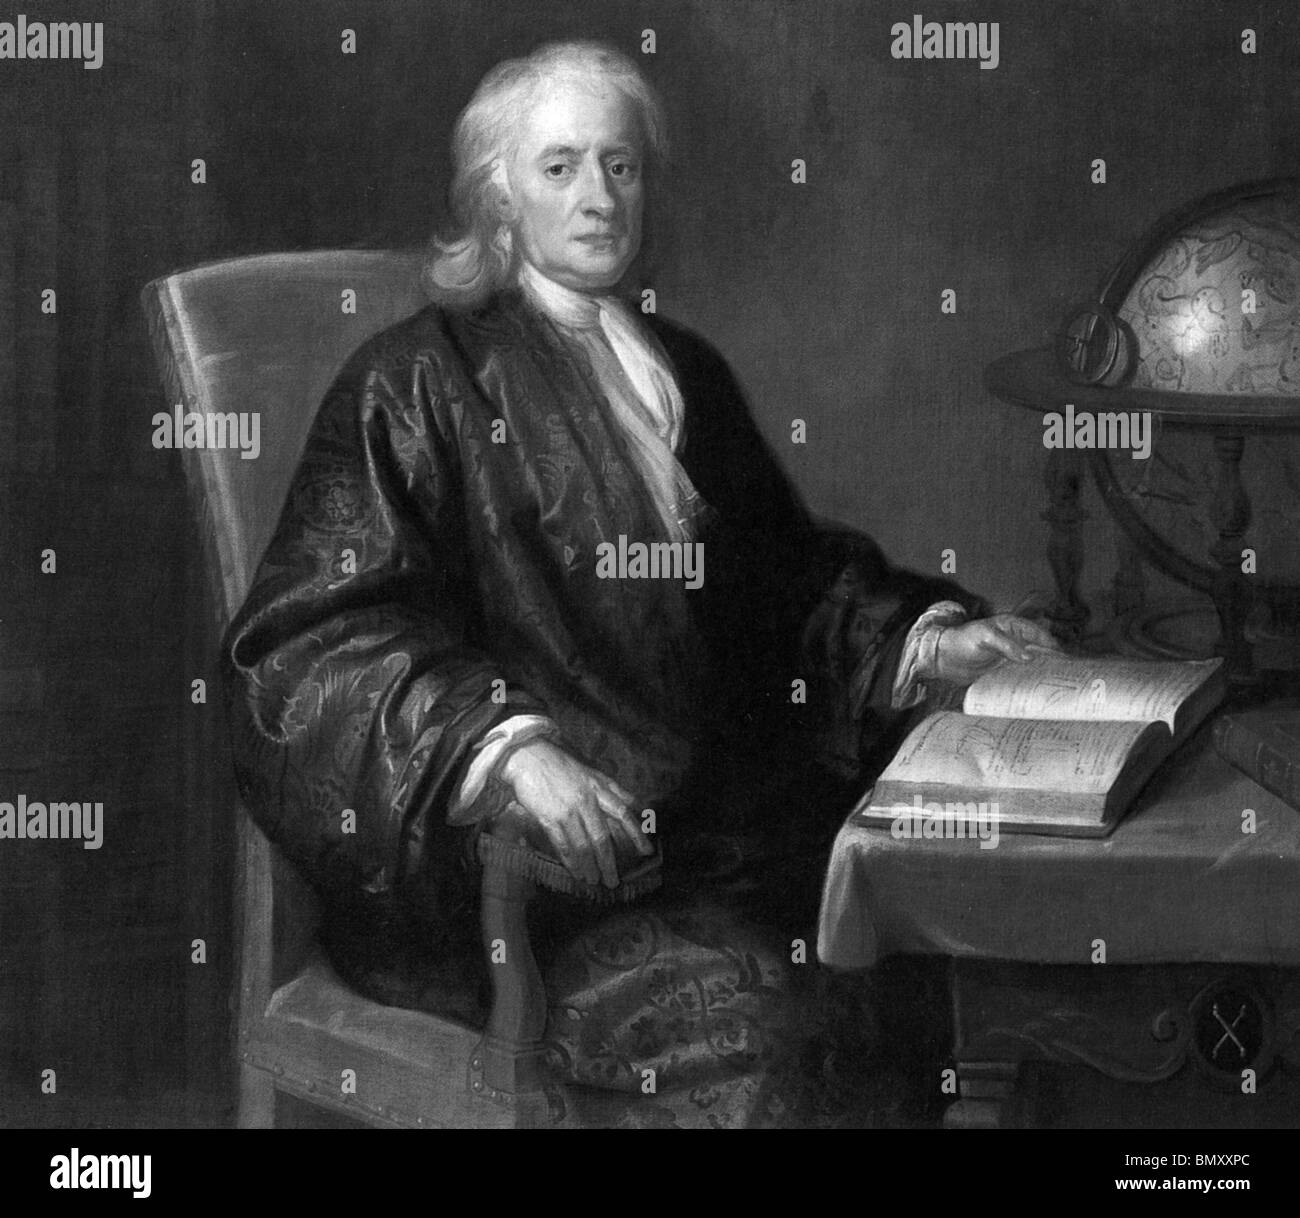 Sir Isaac Newton, 1642 - 1727. English physicist and mathematical scientist  Stock Photo - Alamy